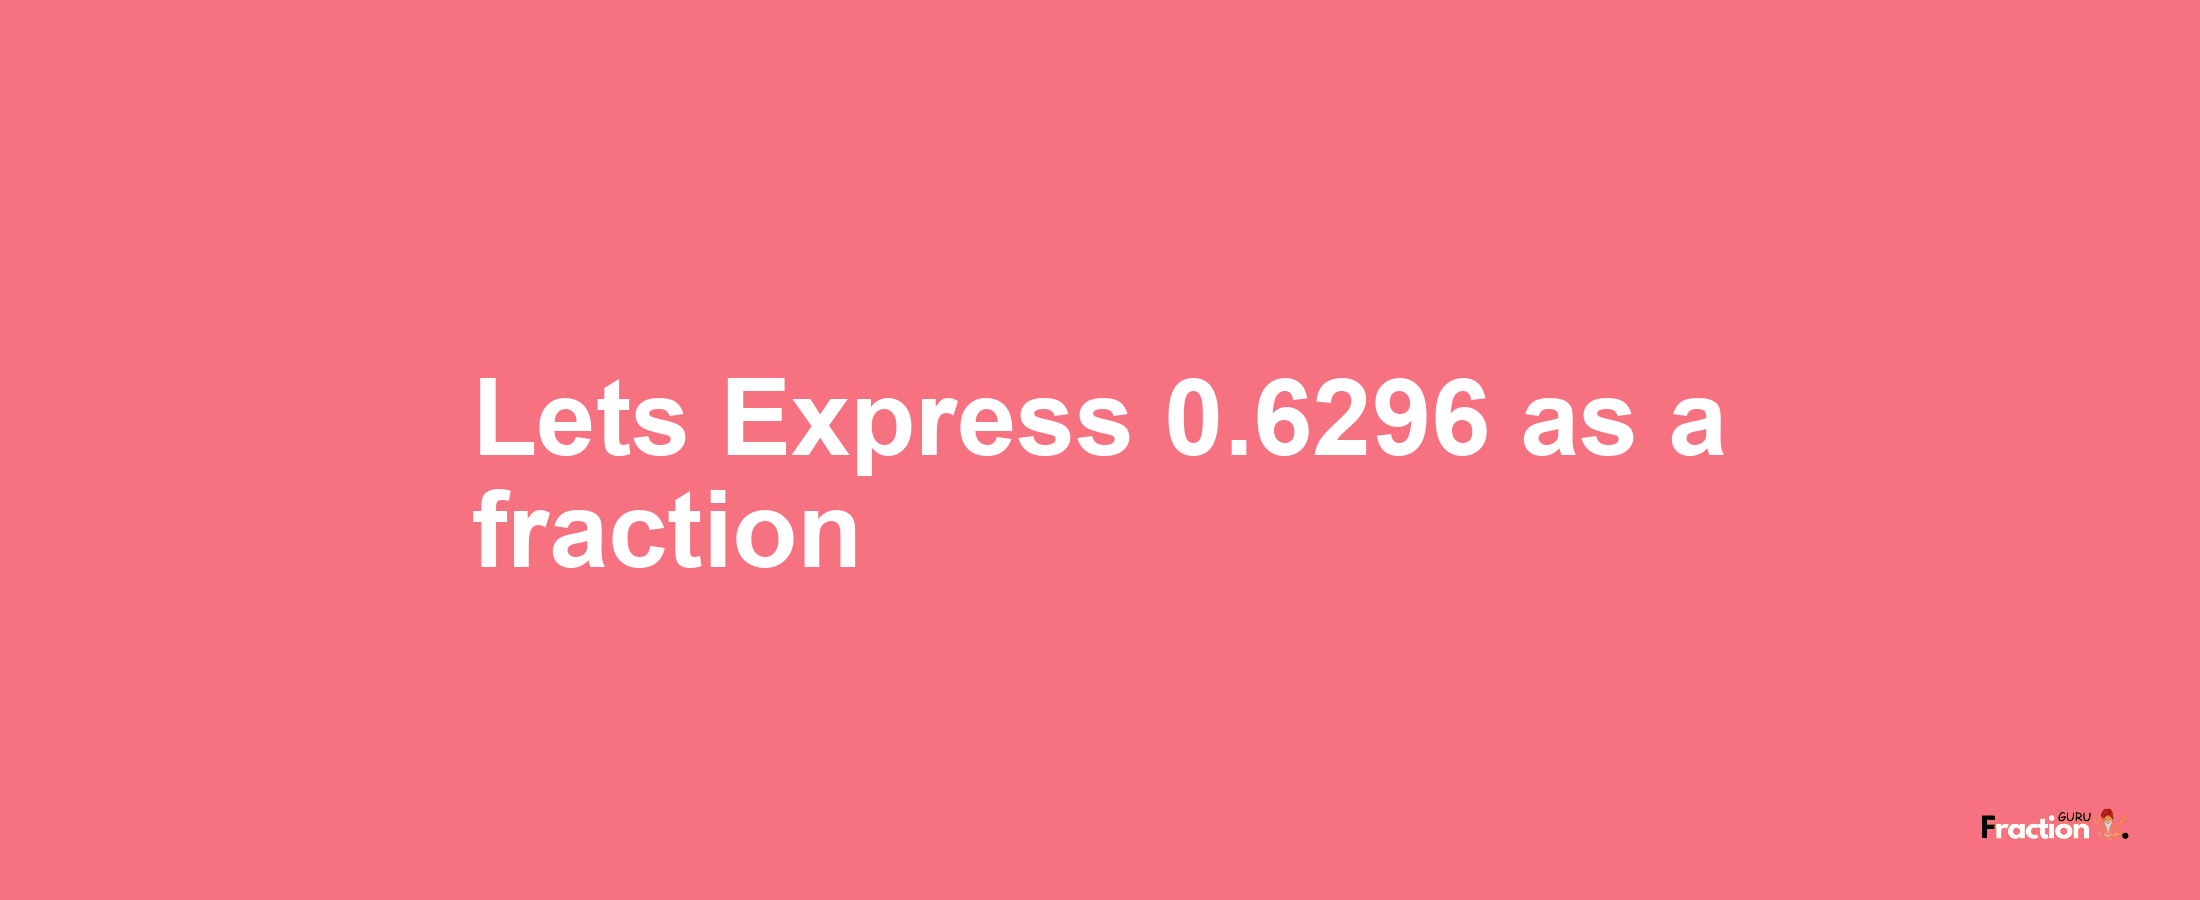 Lets Express 0.6296 as afraction